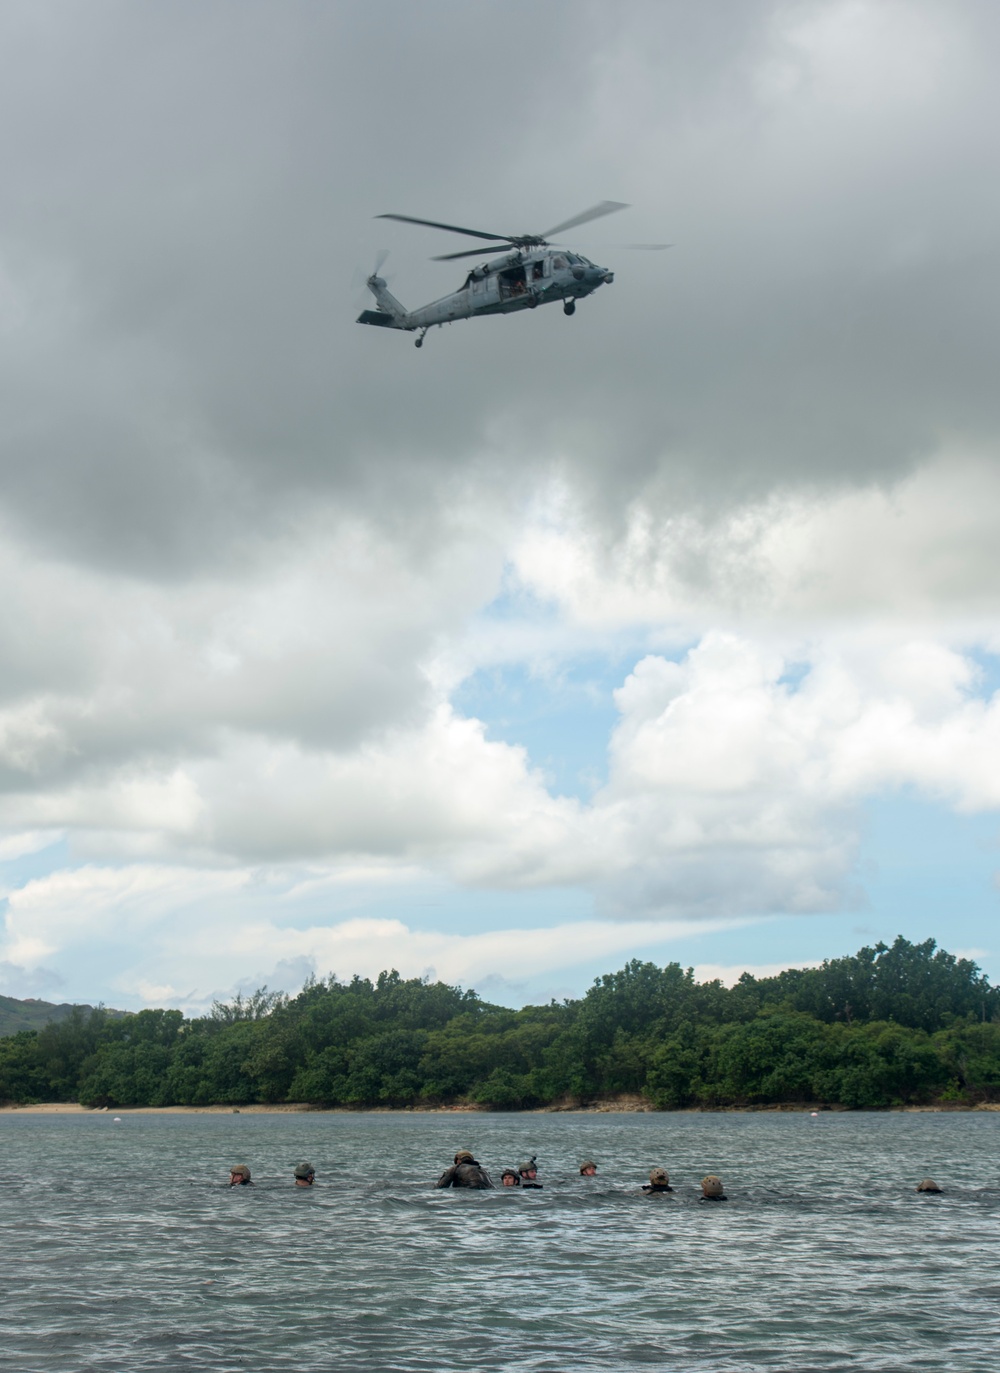 U.S., Allied Forces conduct helocasting knowledge exchange during HYDRACRAB 2019